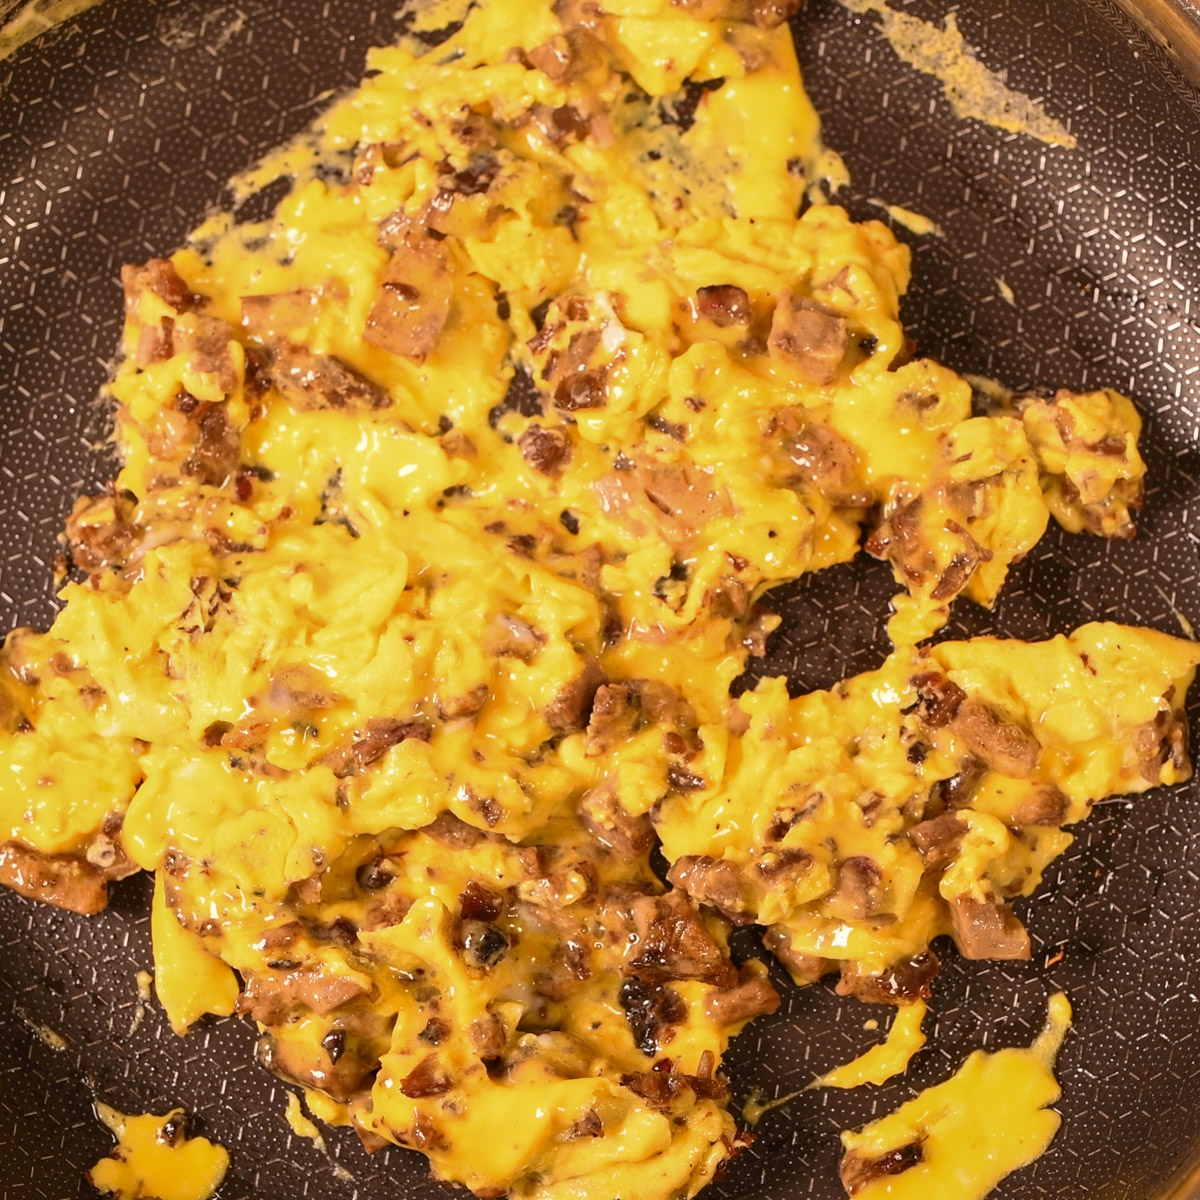 Fold eggs into chopped brisket and cook until eggs are set.